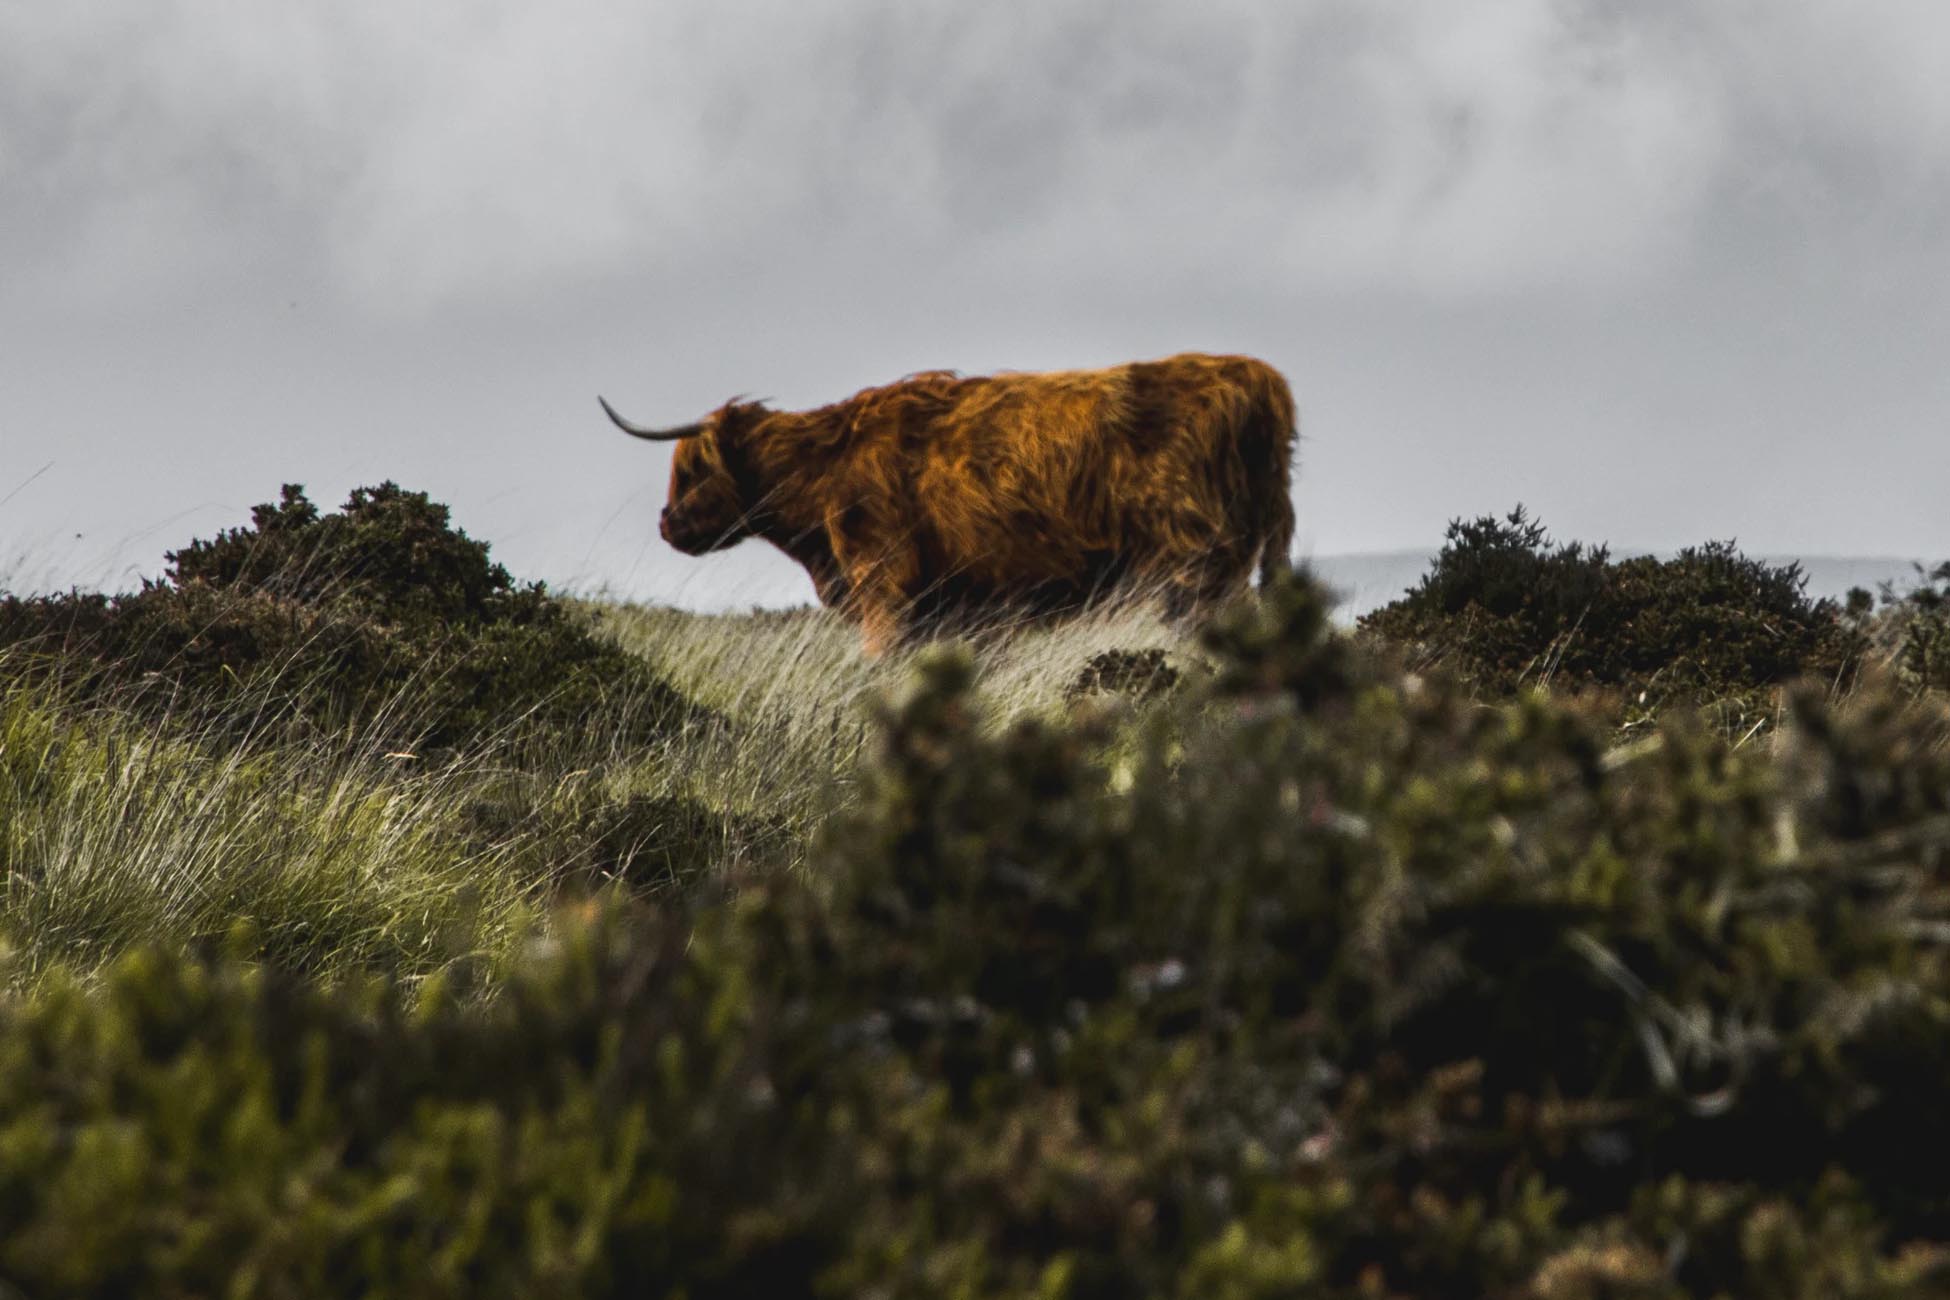 A highland cow is seen in the distance on a grassy hill with overcast grey sky